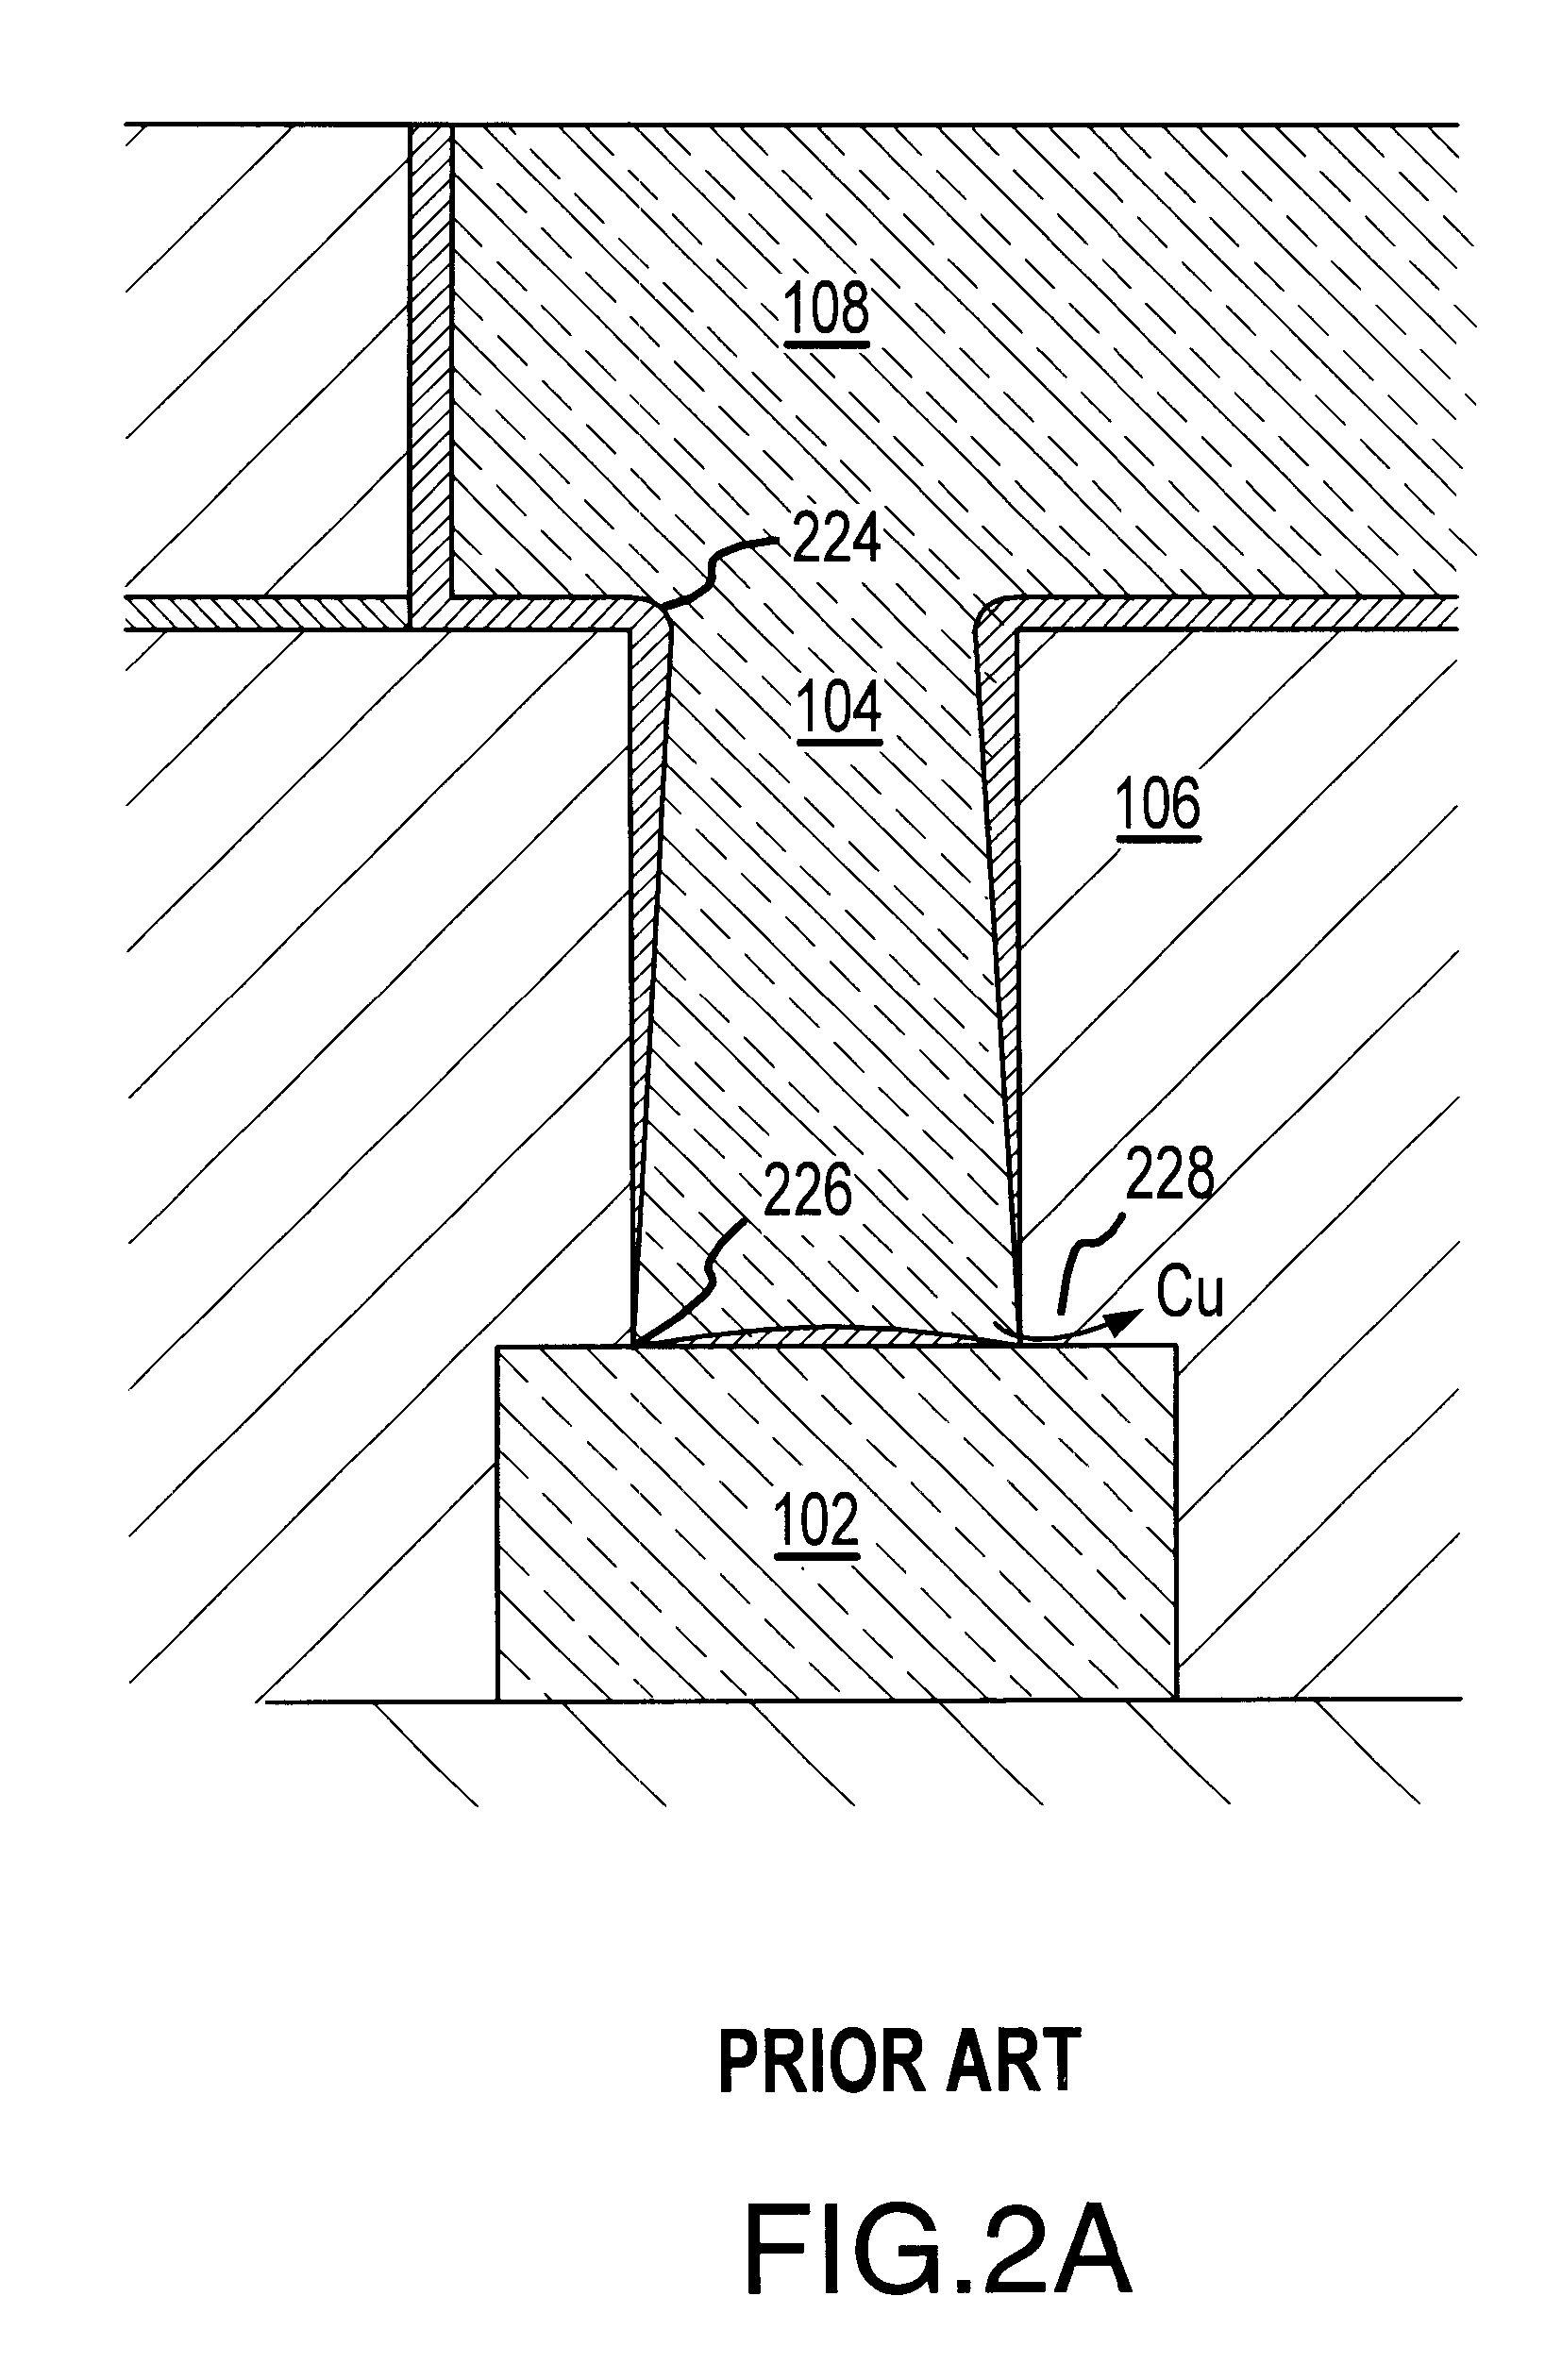 Dual-damascene interconnect structures and methods of fabricating same